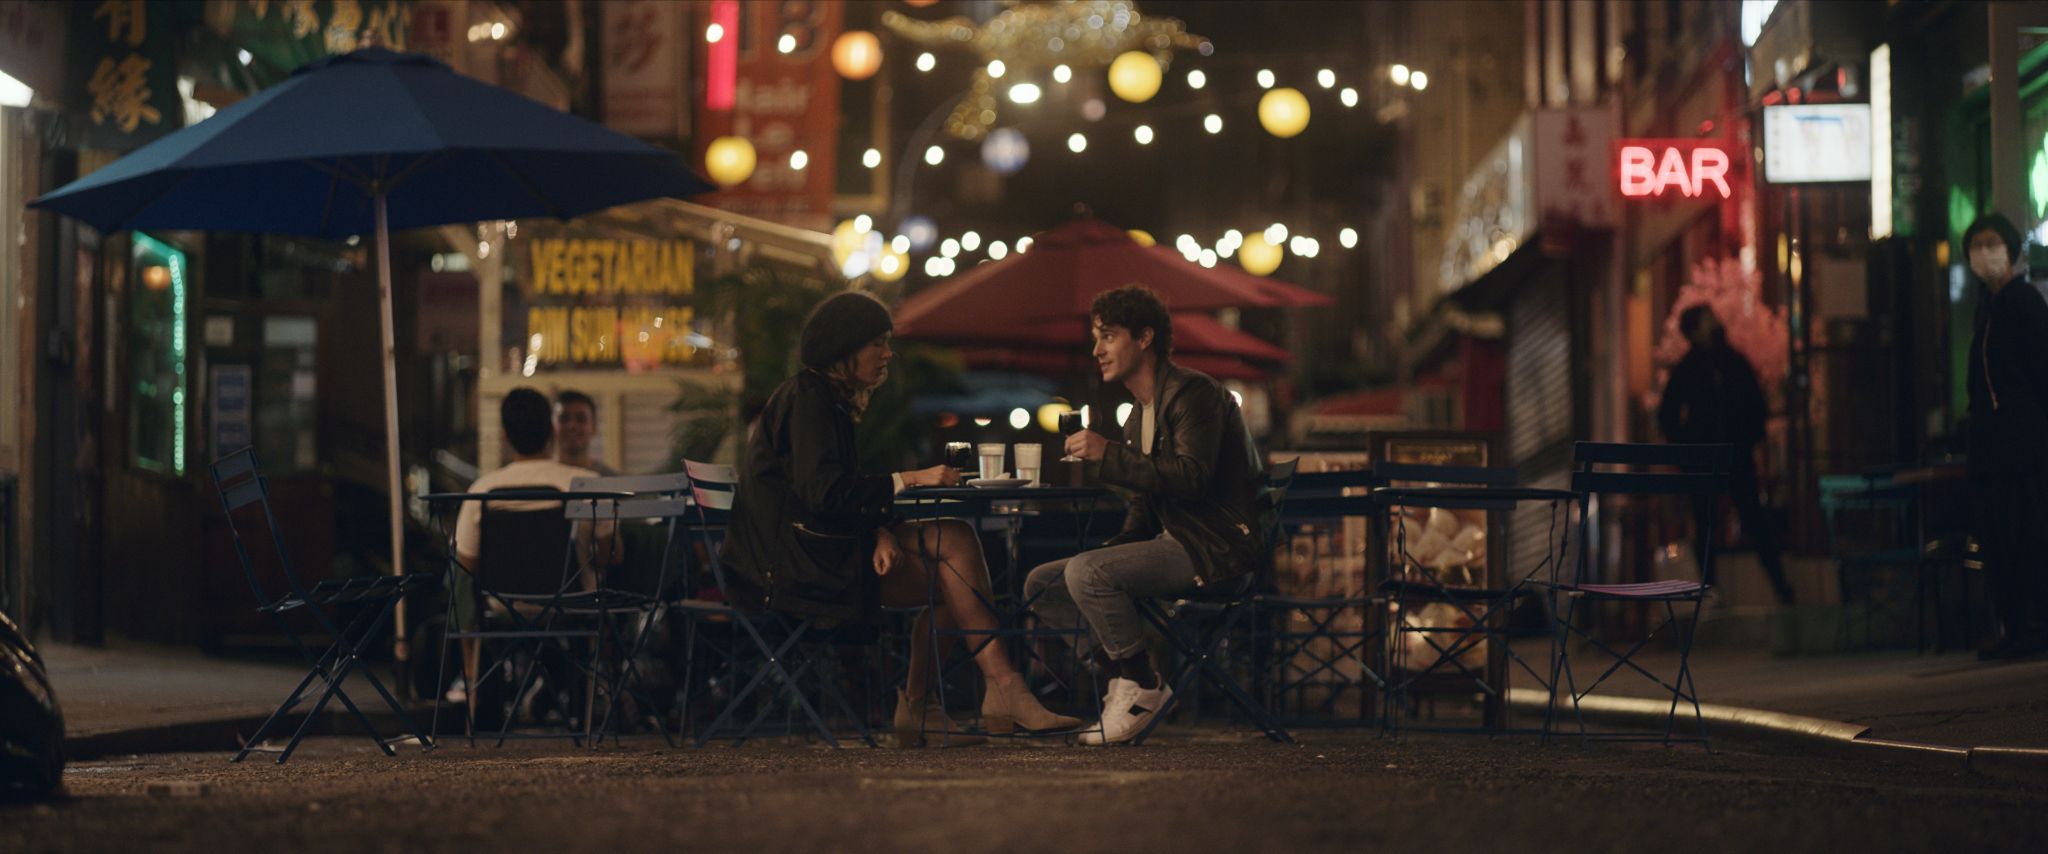 A couple sitting at a table and enjoying drink talking on a restaurant patio in the city at night.